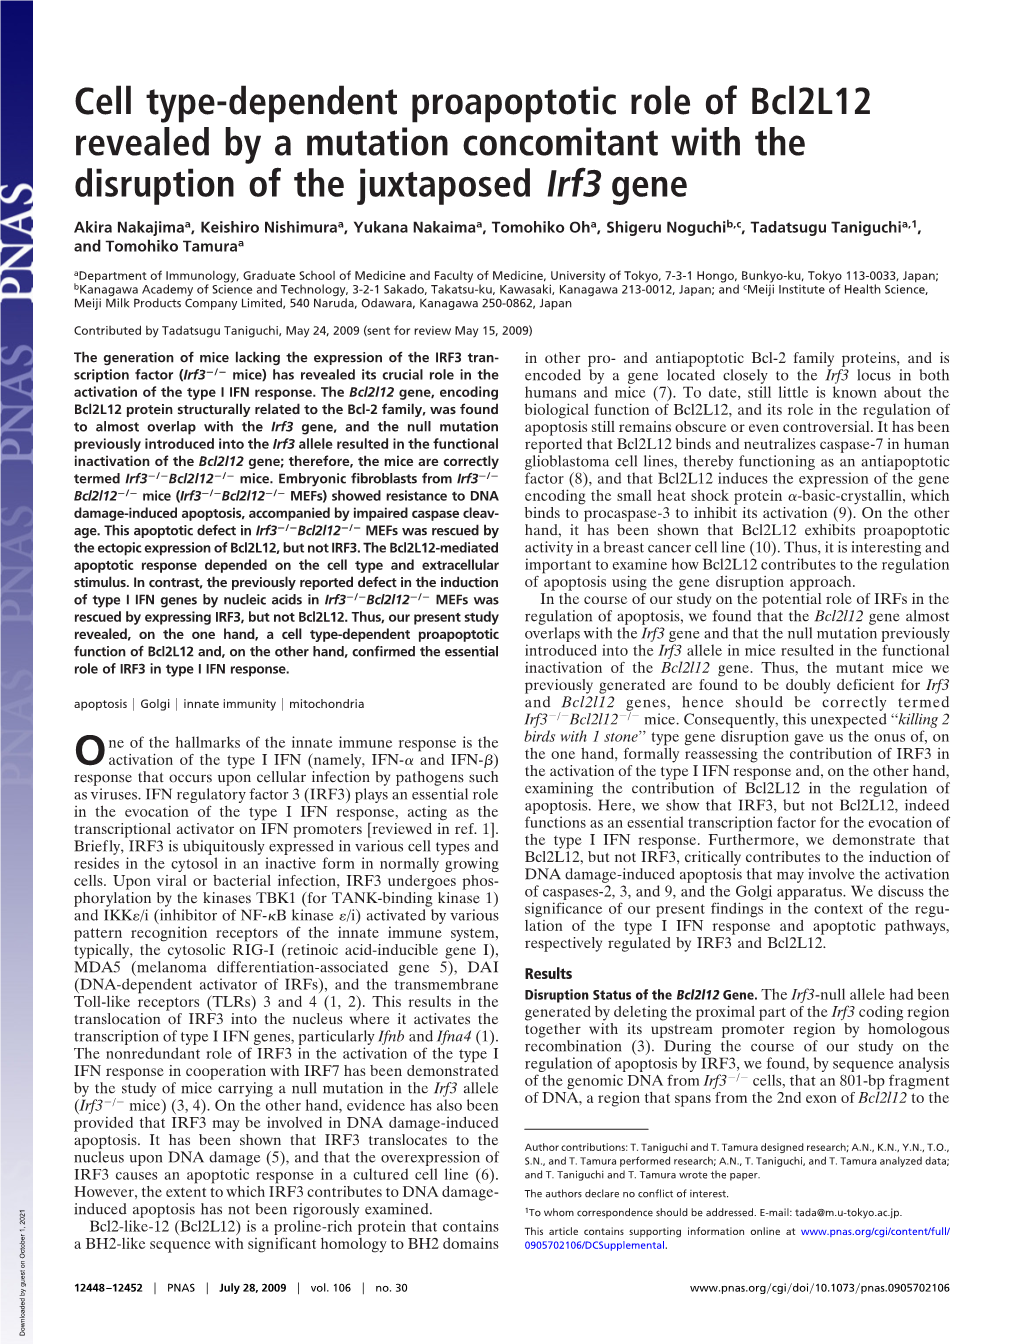 Cell Type-Dependent Proapoptotic Role of Bcl2l12 Revealed by a Mutation Concomitant with the Disruption of the Juxtaposed Irf3 Gene